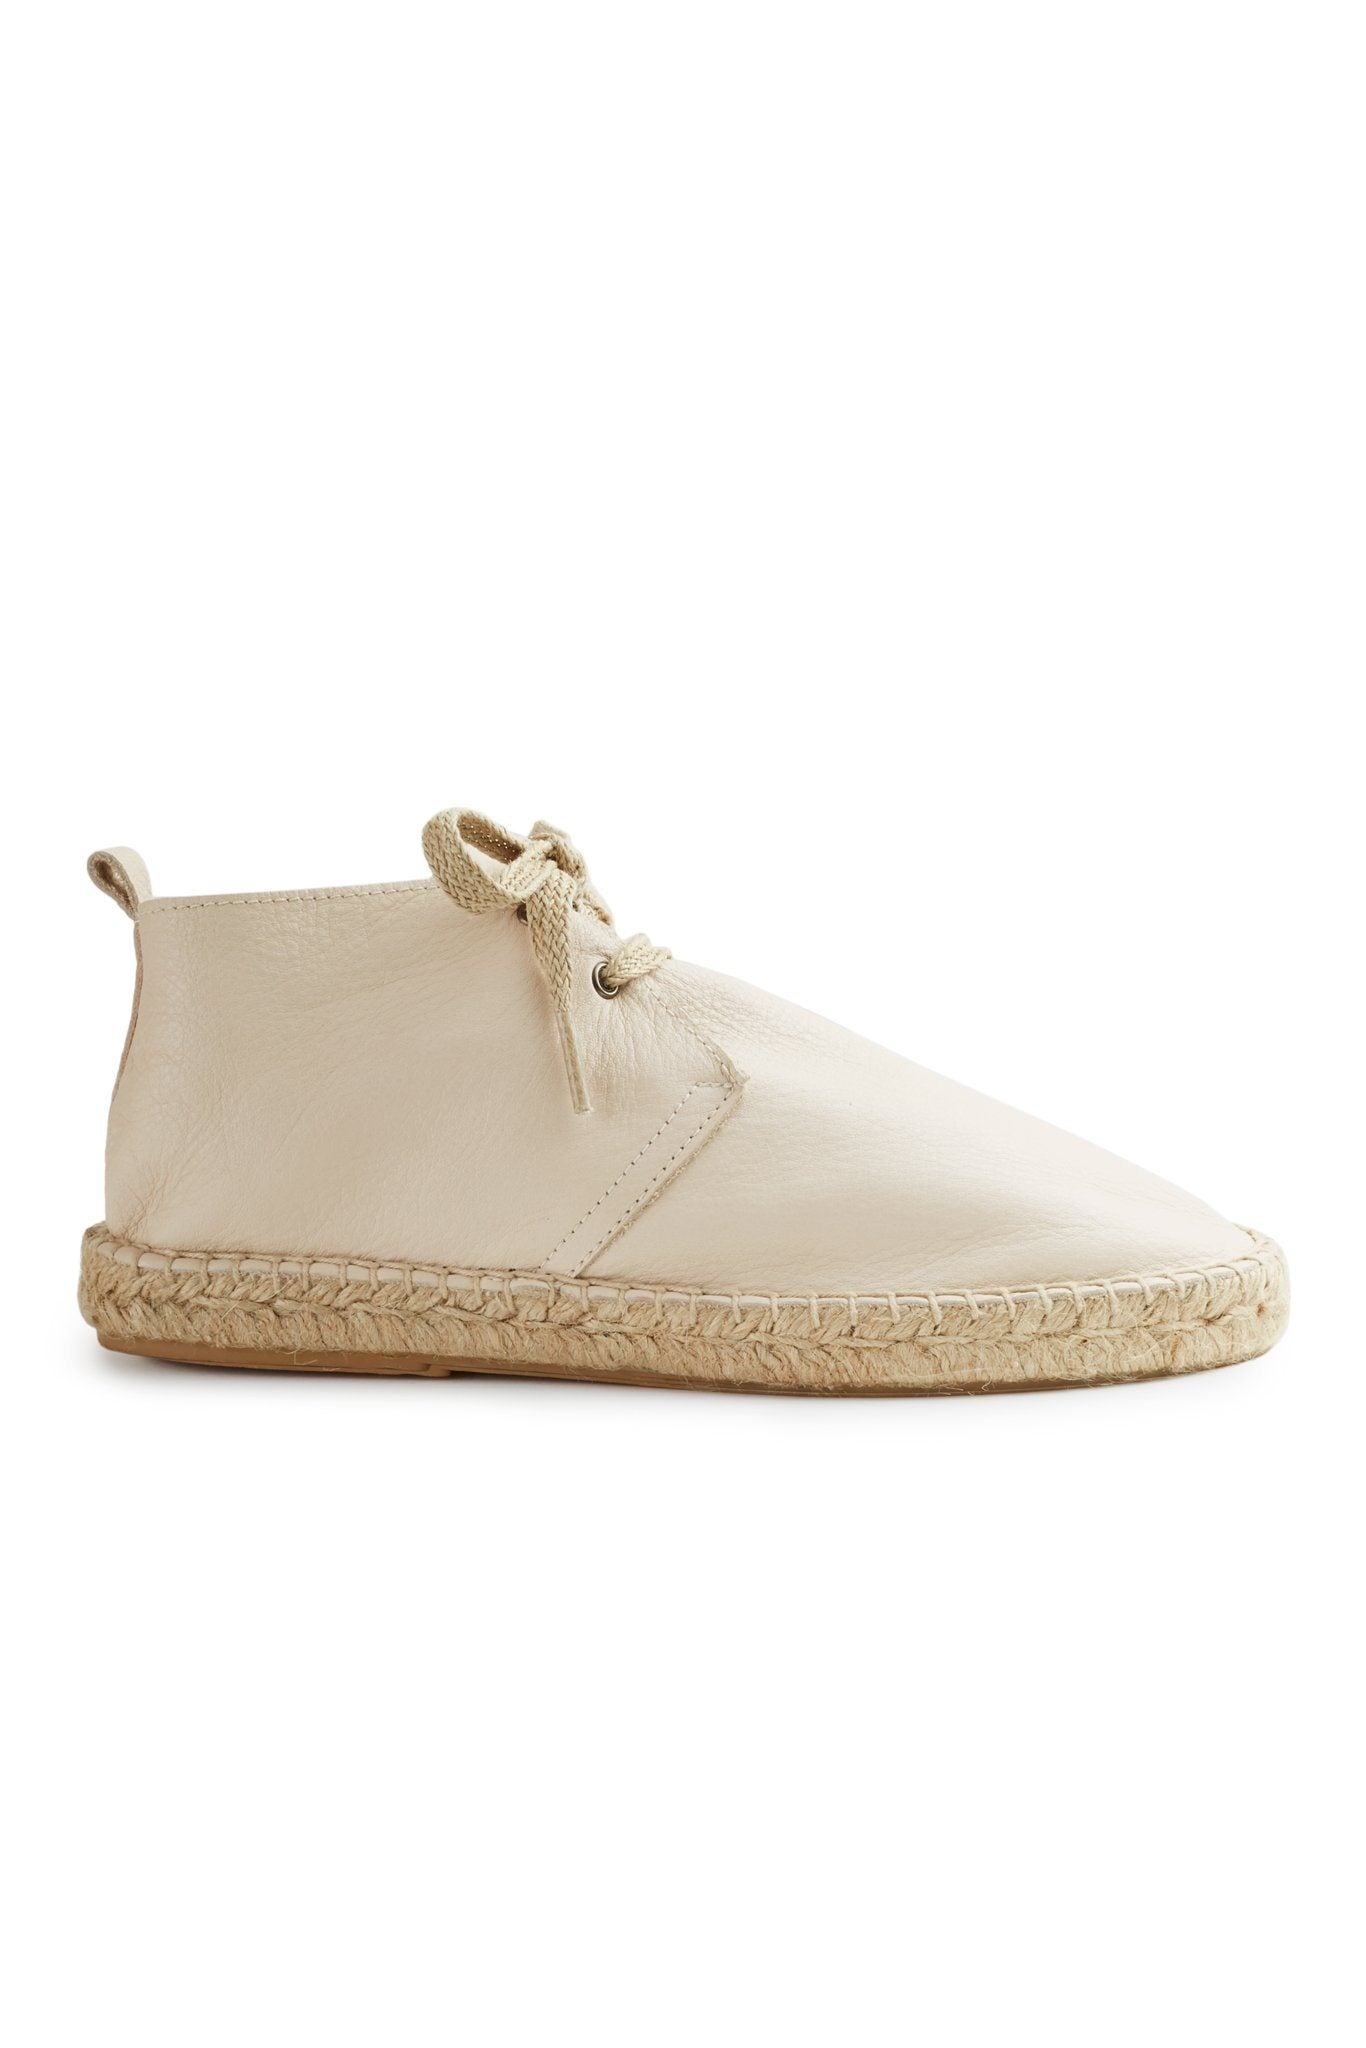 bootie espadrille in off white Espadrilles lisa b. off white 36 (US 5.5-6) 